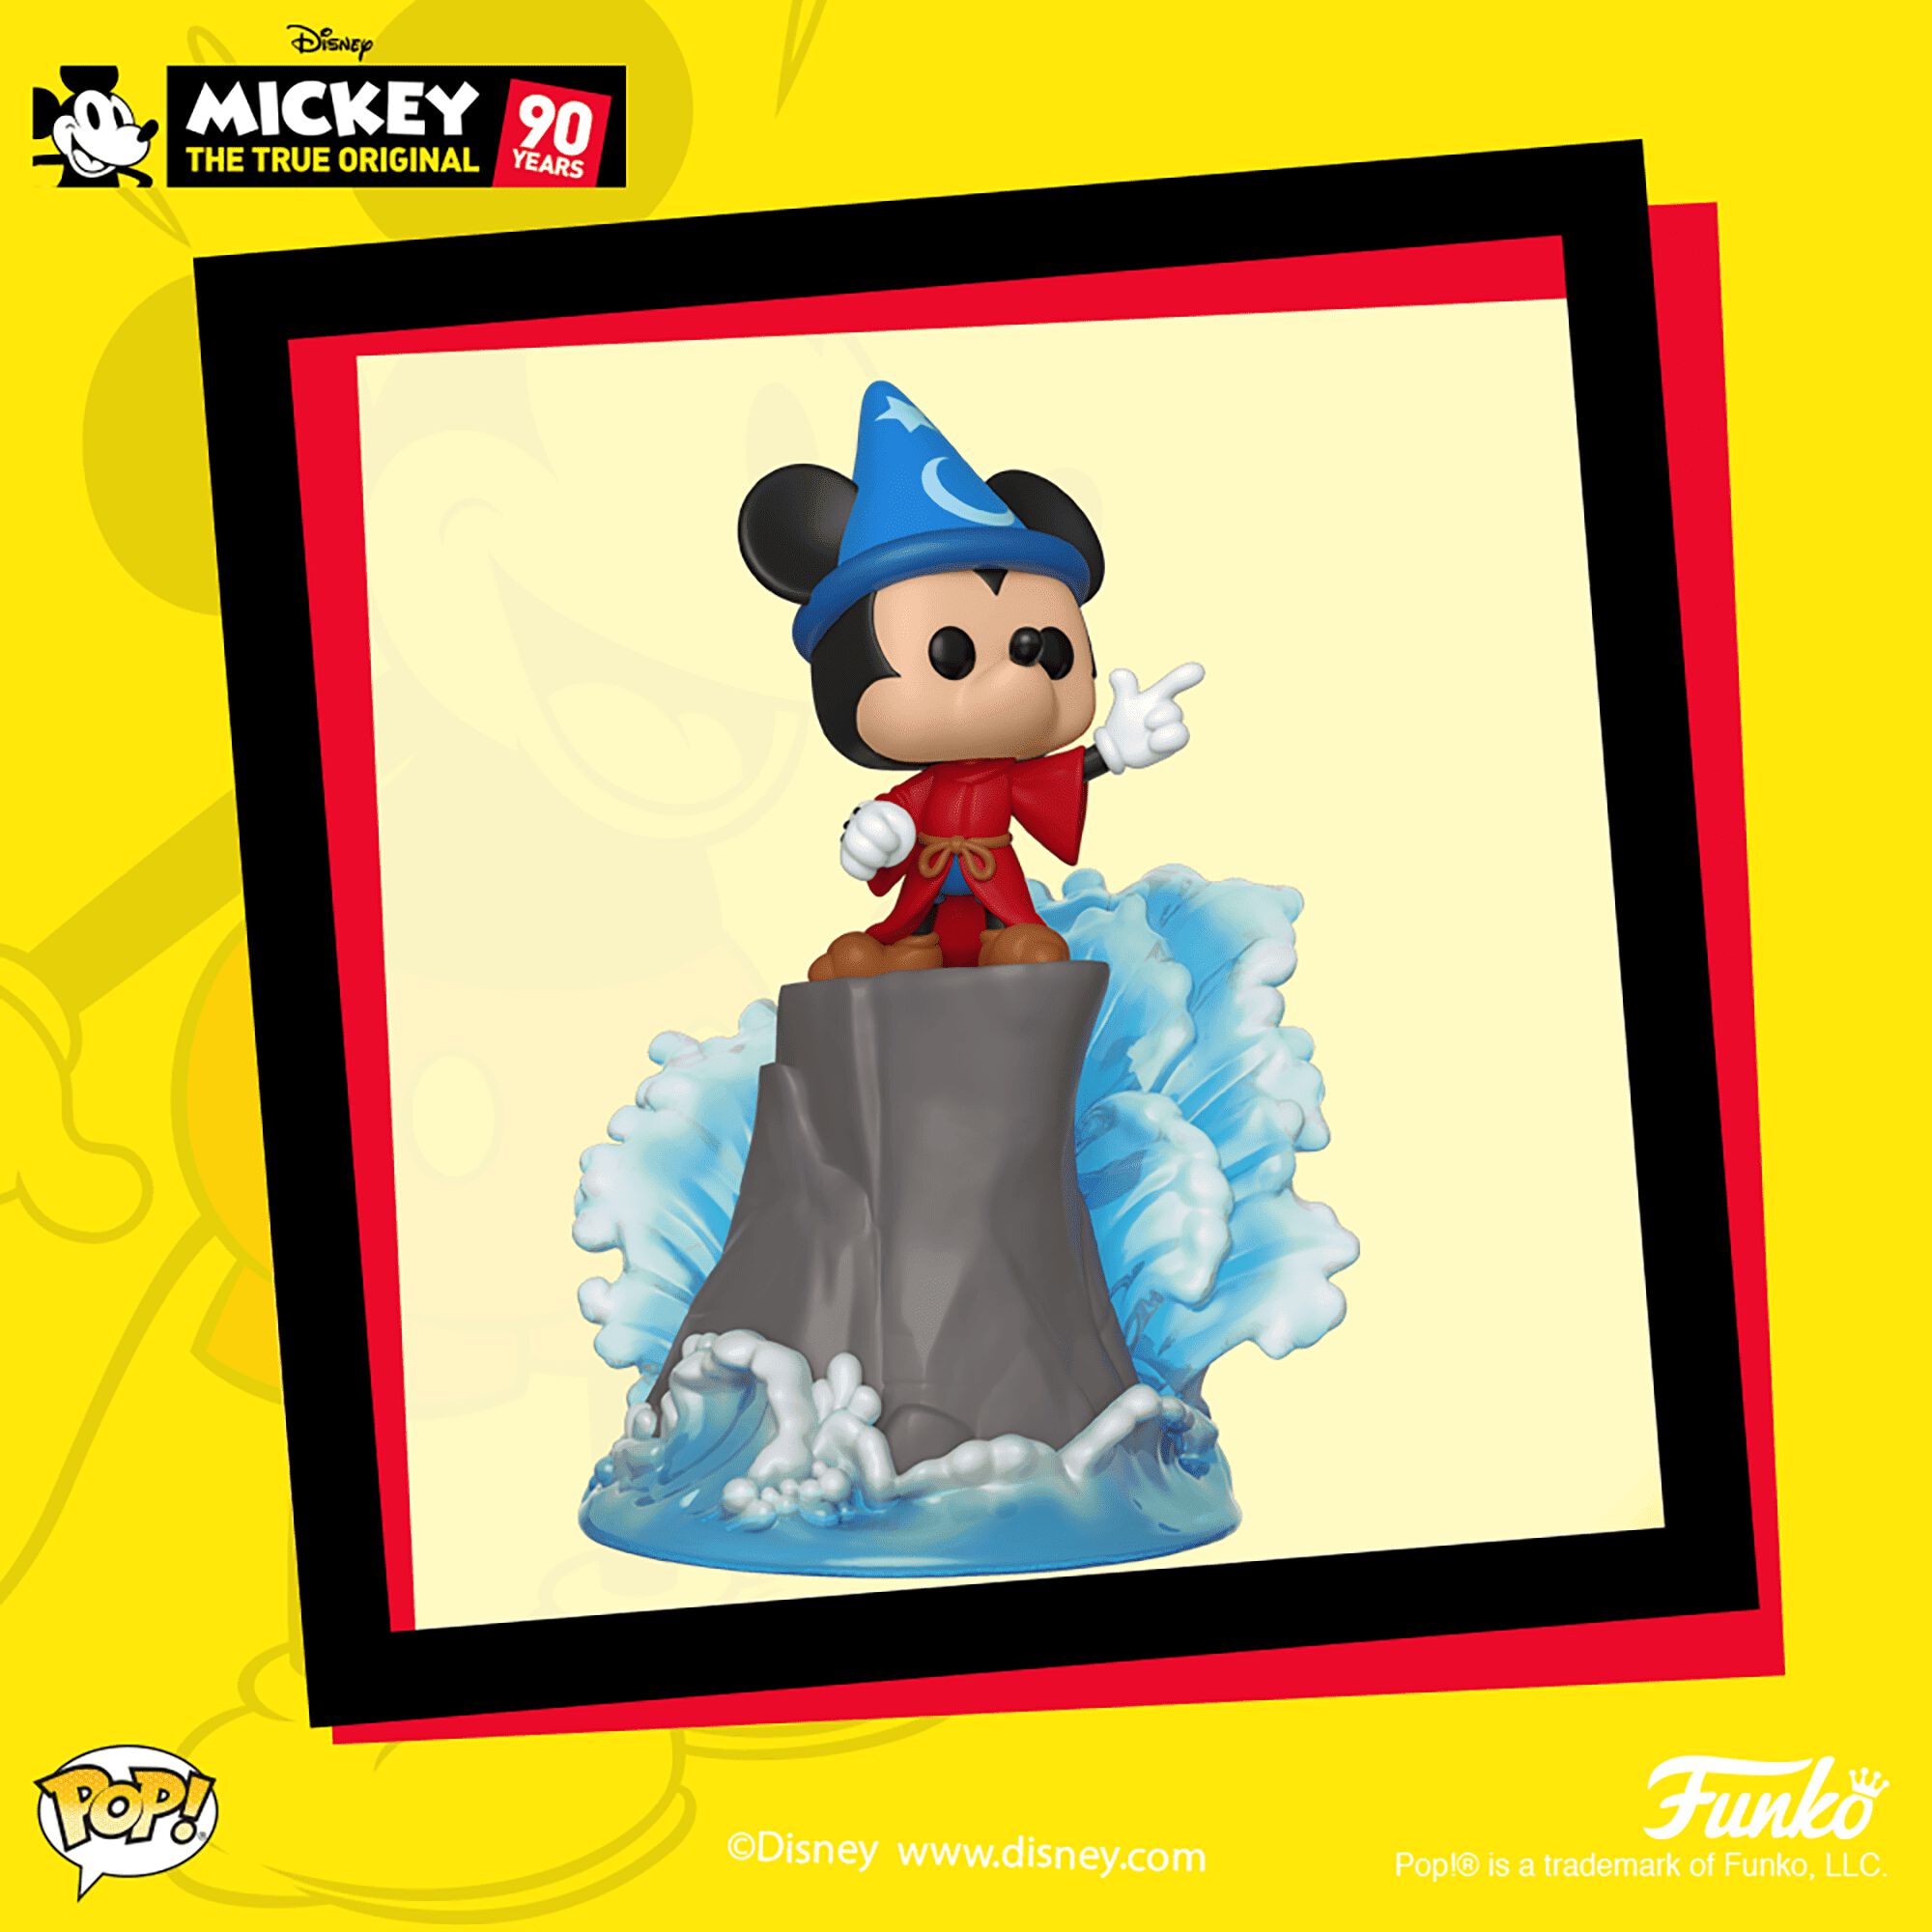 Coming Soon: BoxLunch Fantasia Pop! and Loungefly!